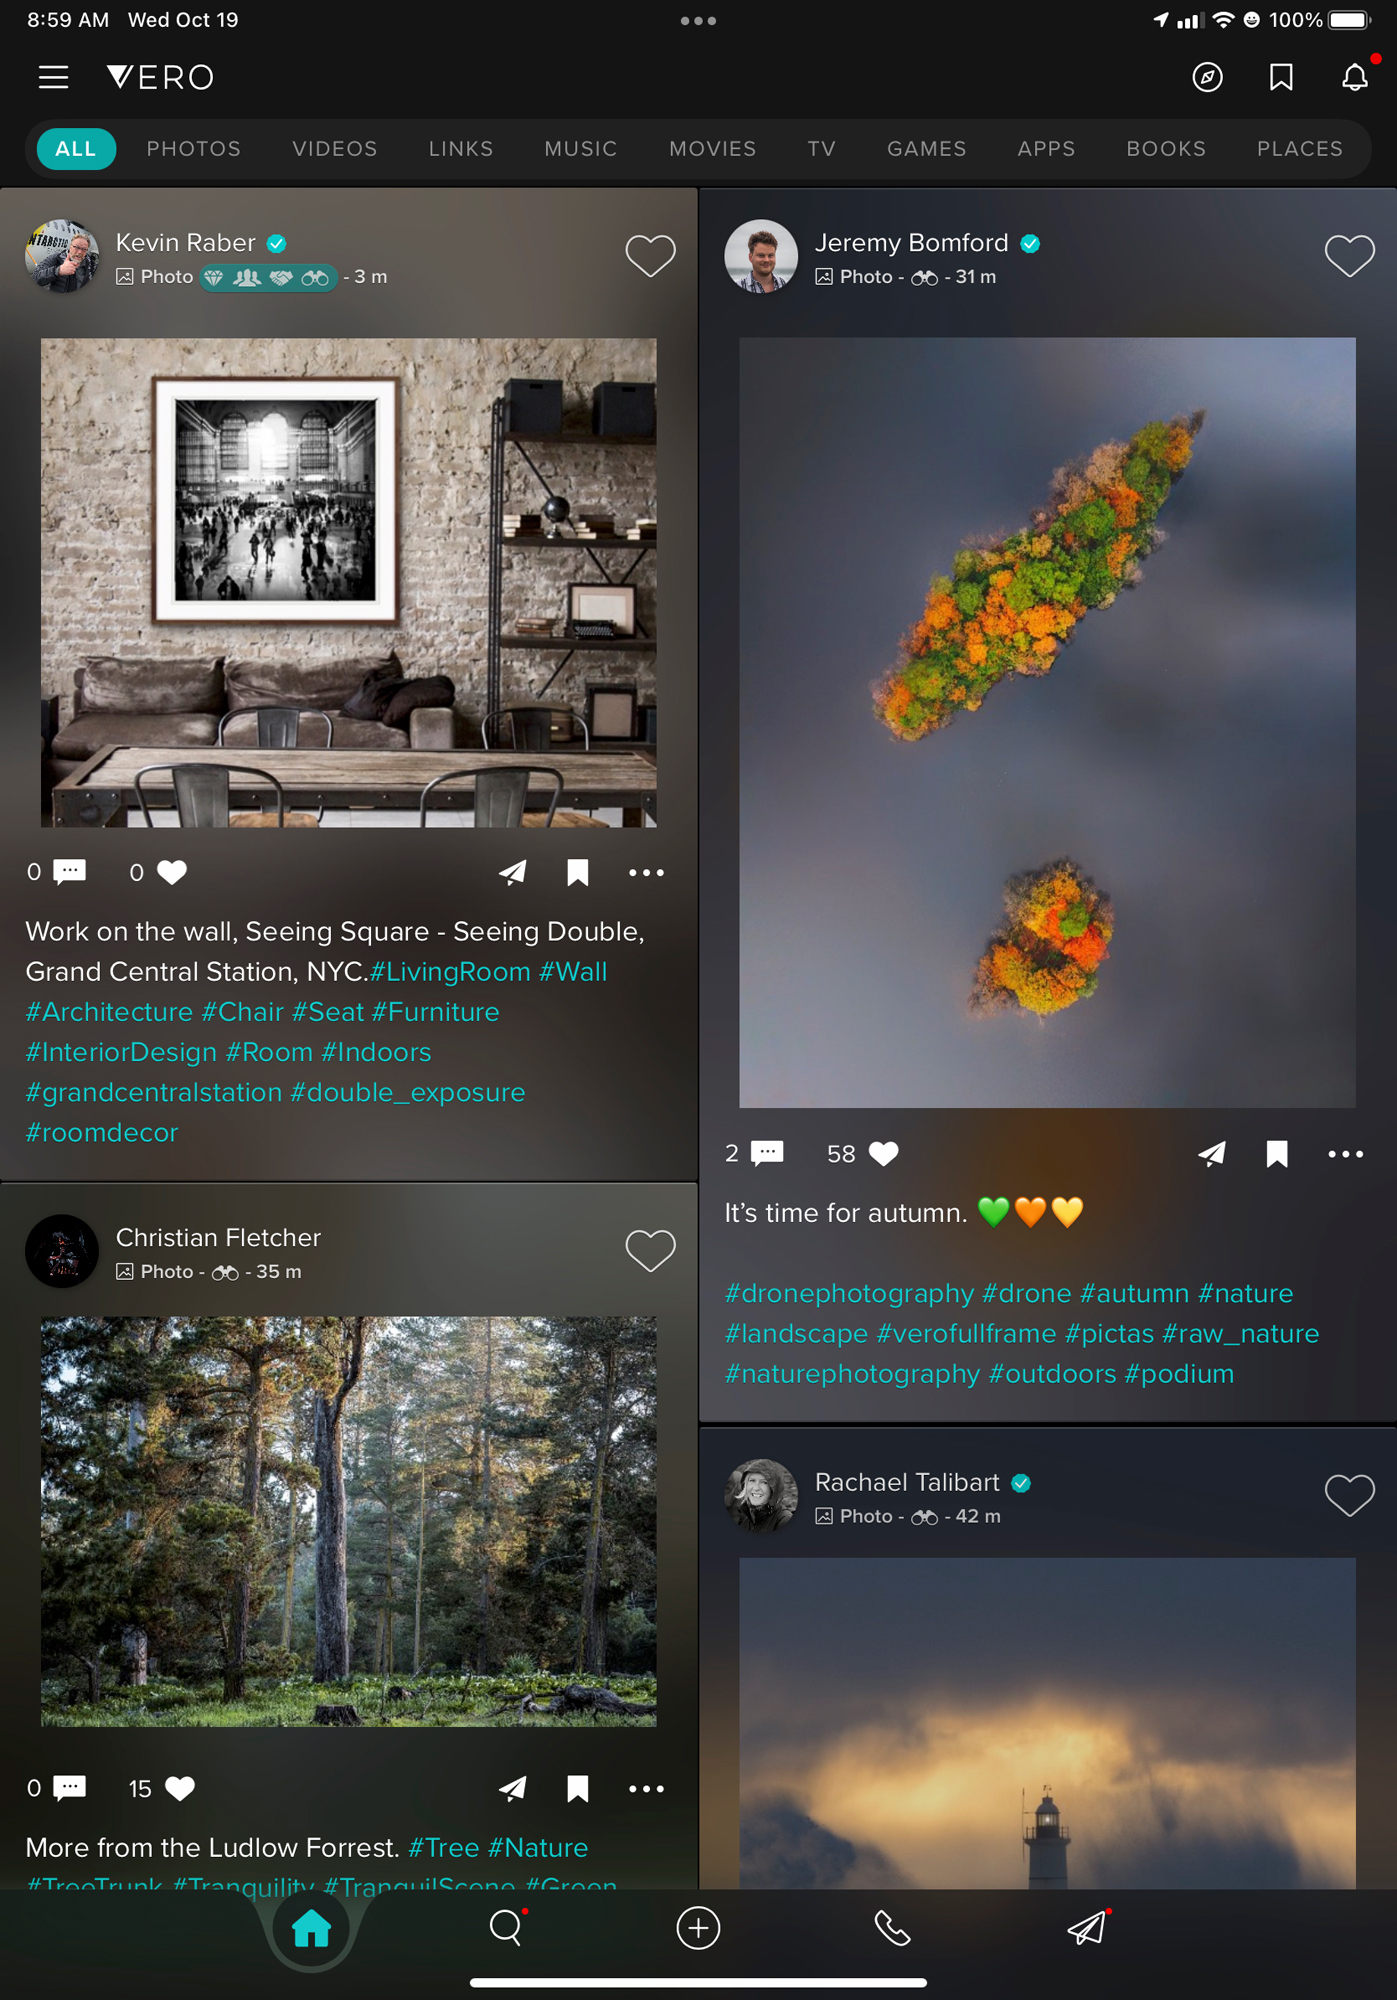 Vero offers on an iPad a two colum view that you can scroll through and if you like an image touch a heart icon to show the creator you like it. You can also click on the image and see a detail like shown below.